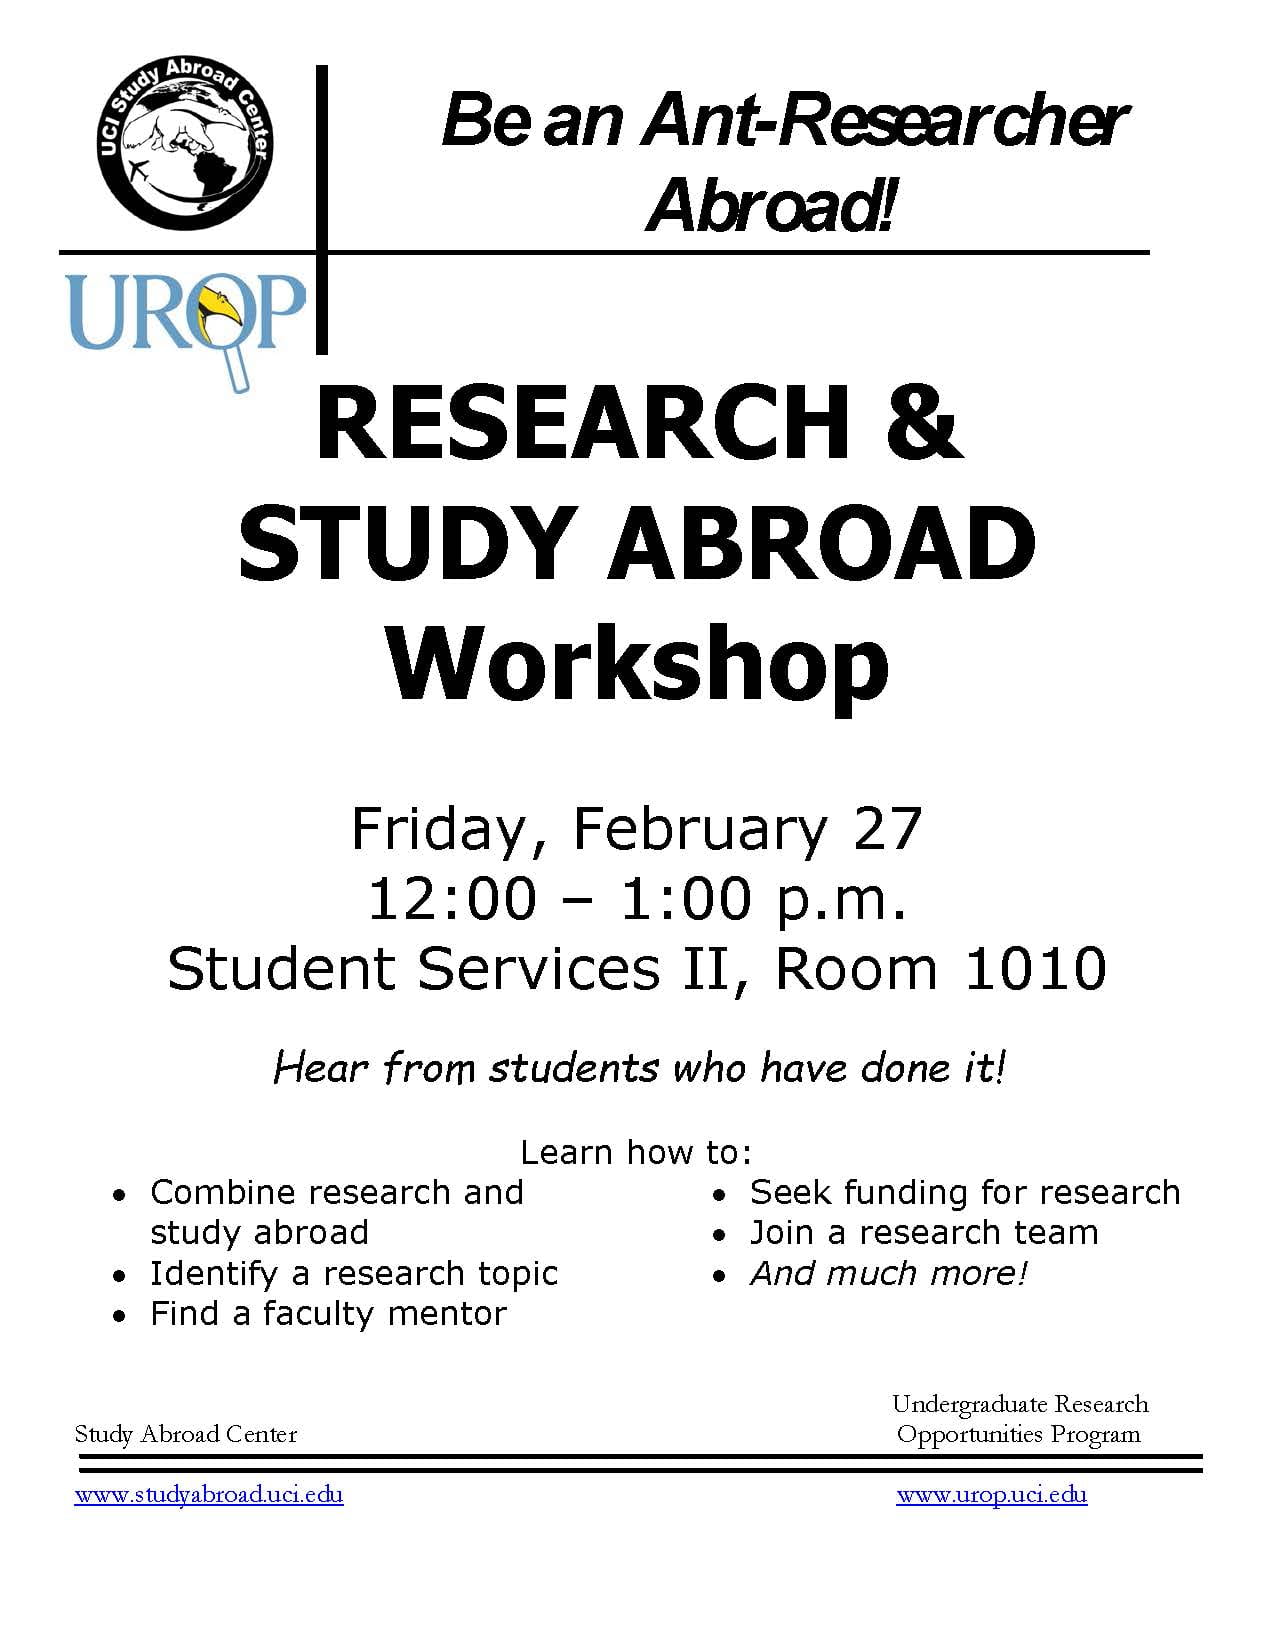 Research & Study Abroad Workshop February 27